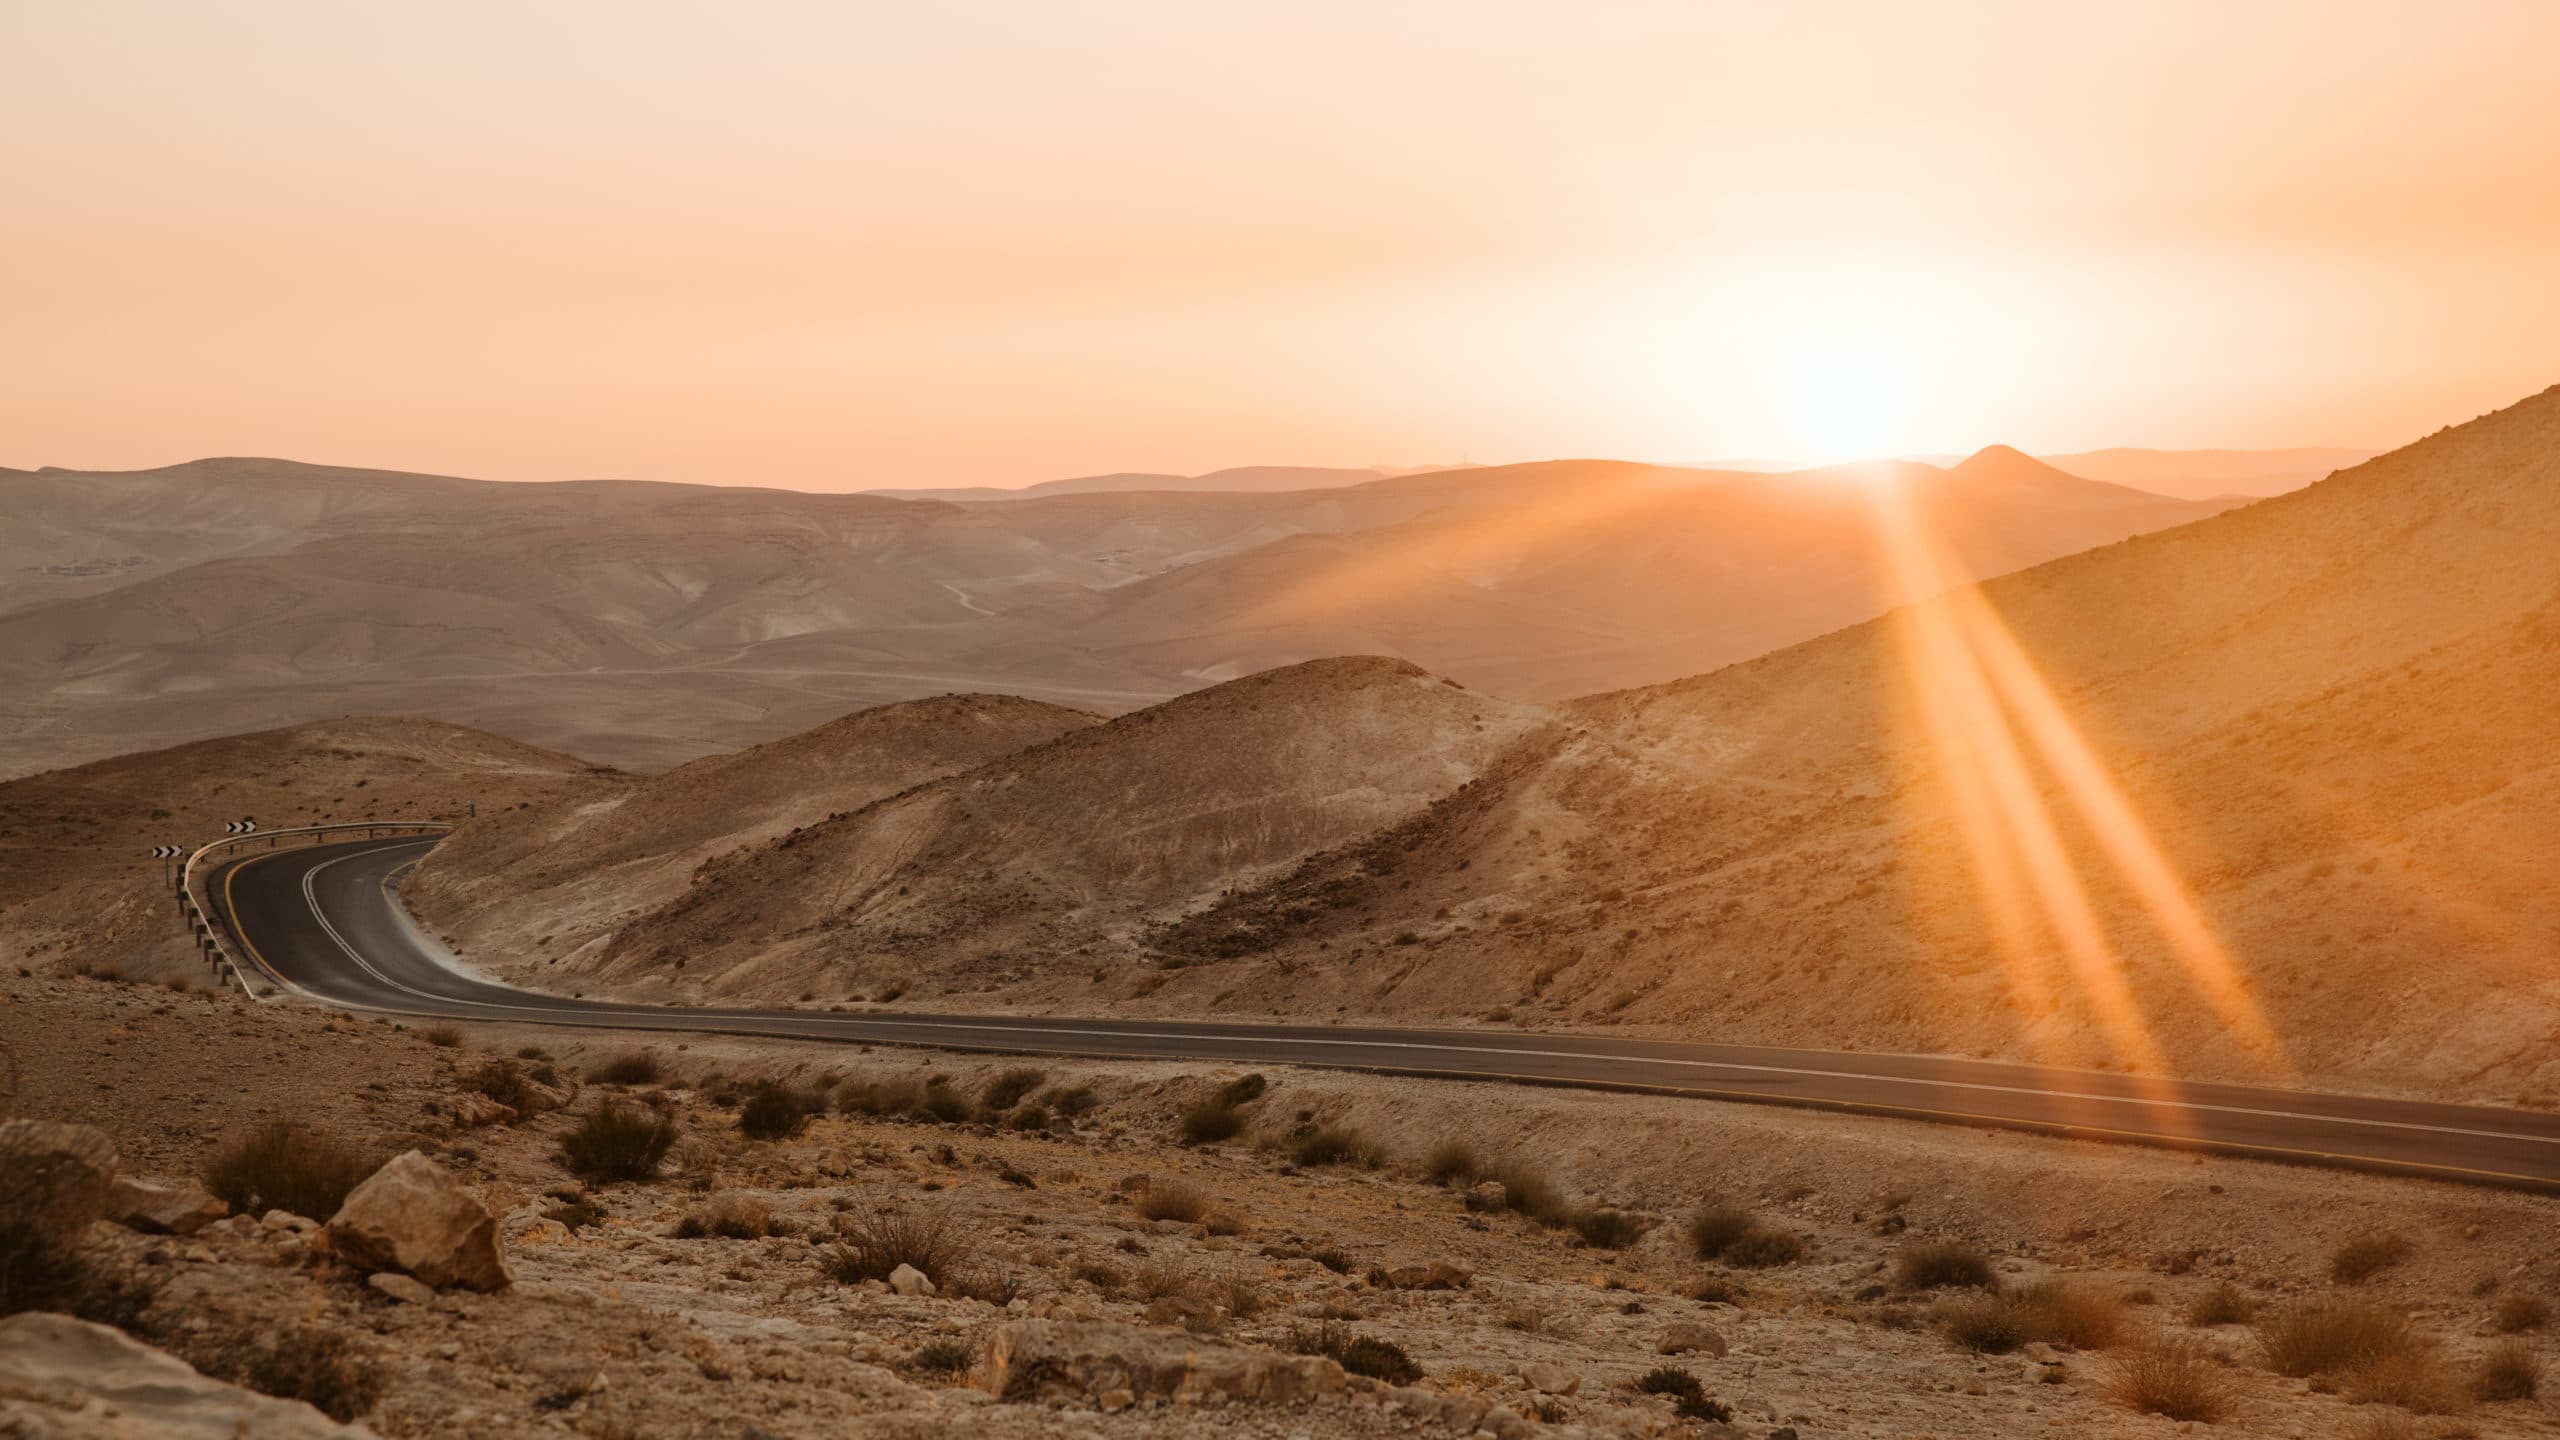 sunset in the negev